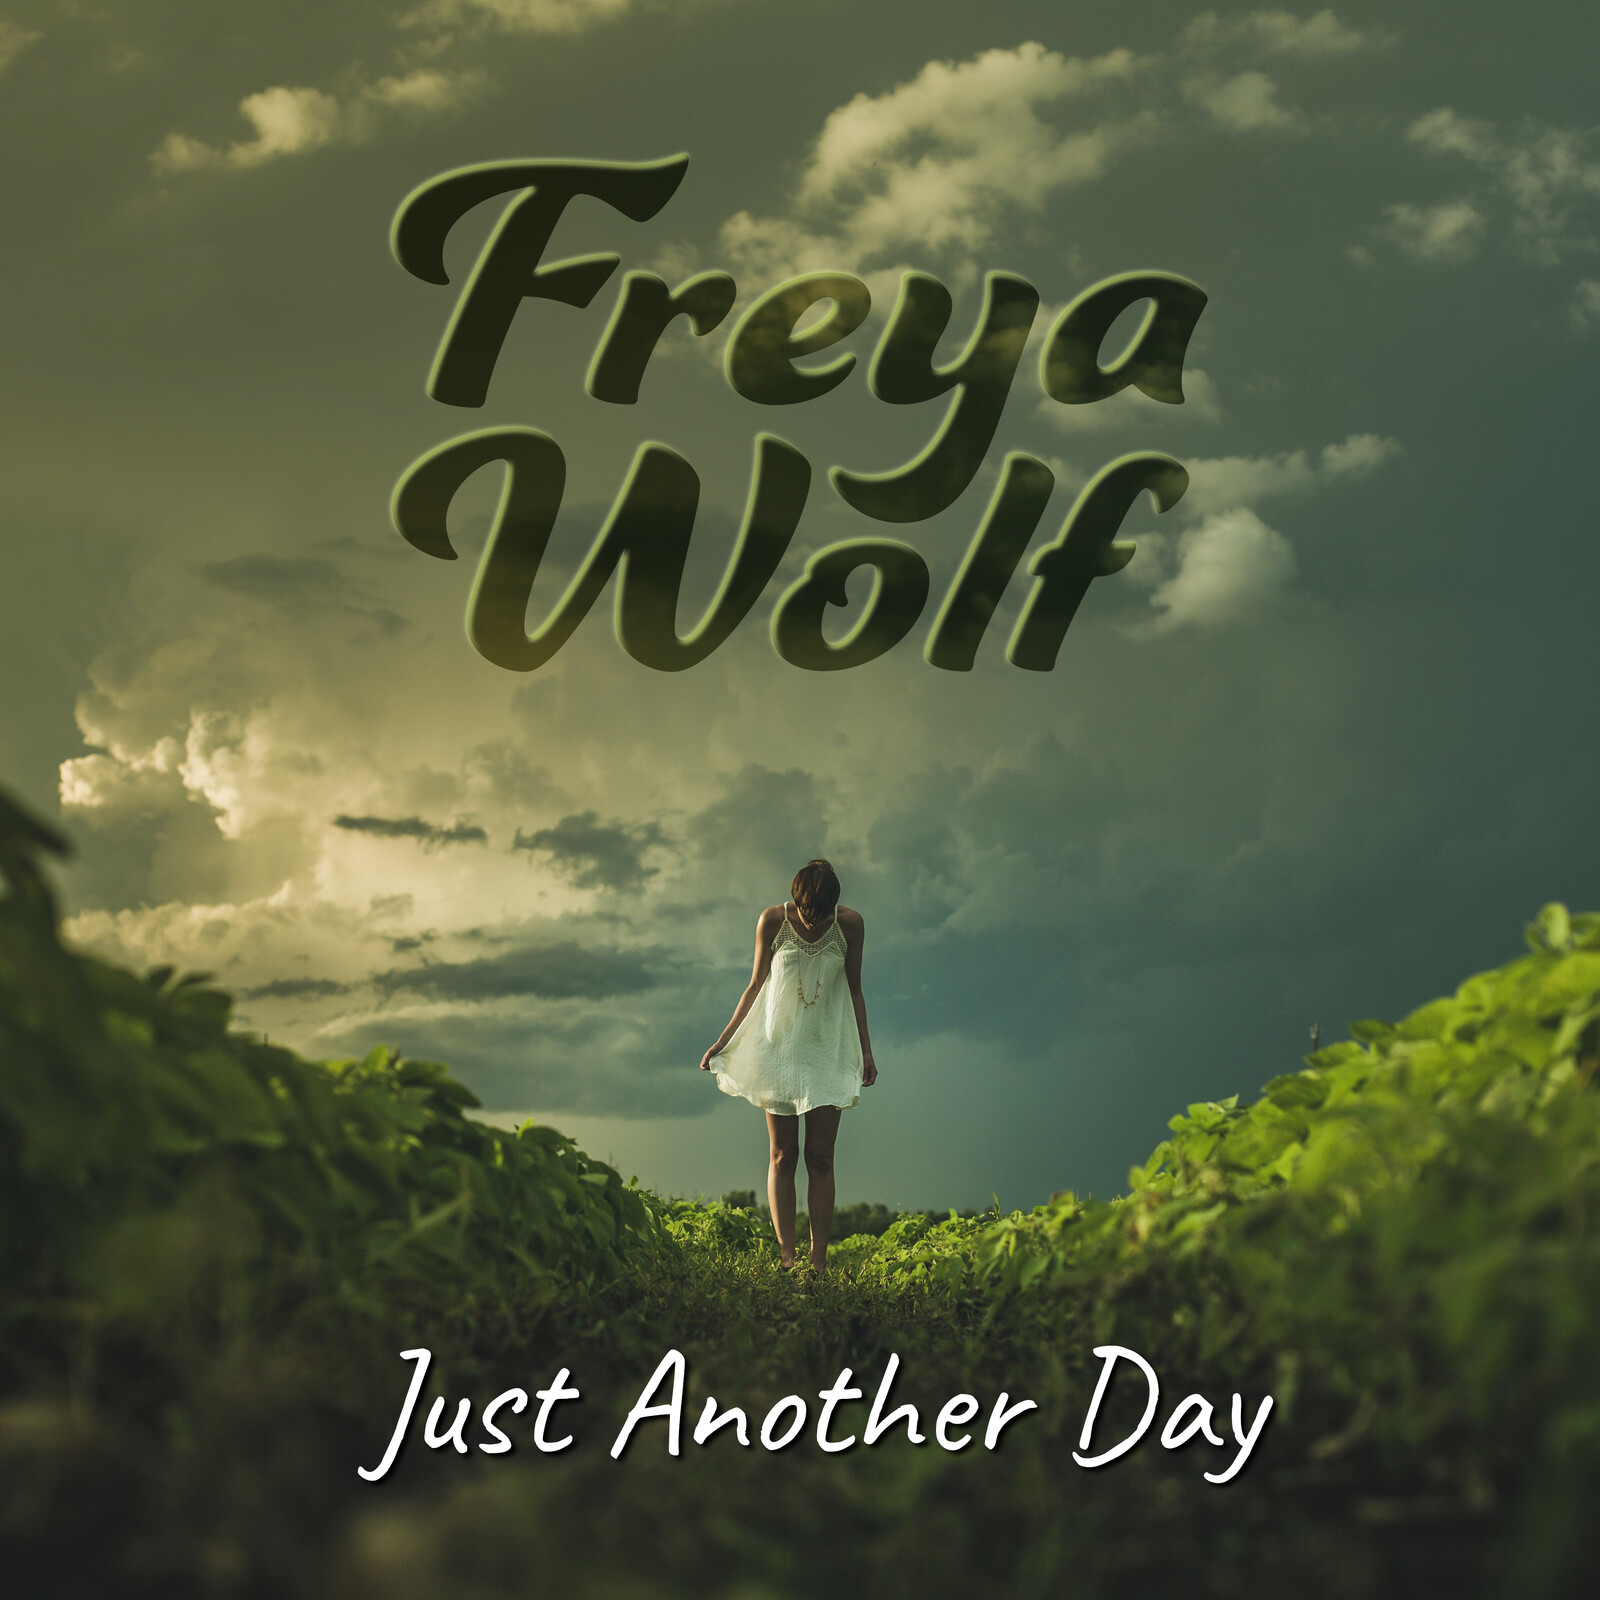 Freya Wolf - "Just Another Day" album cover.

Main Image supplied by client: Matthew Henry via unsplash.com